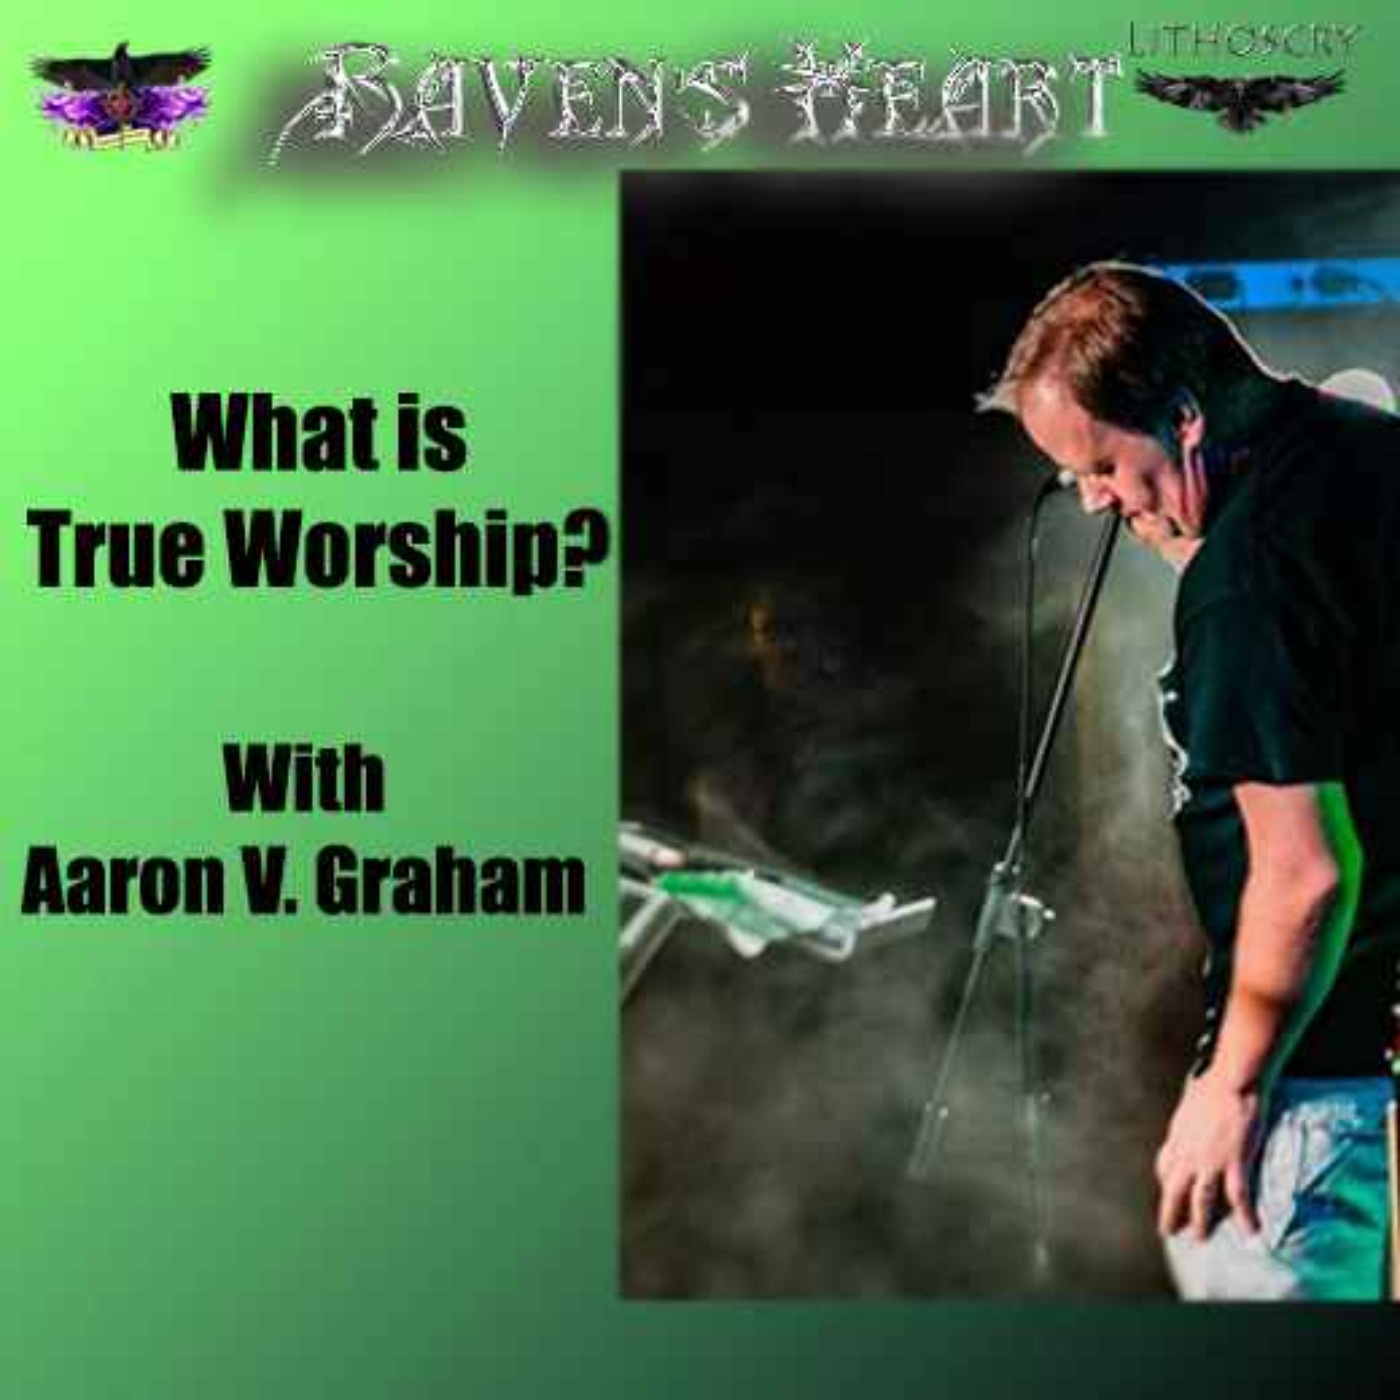 What is True Worship? With Aaron V Graham